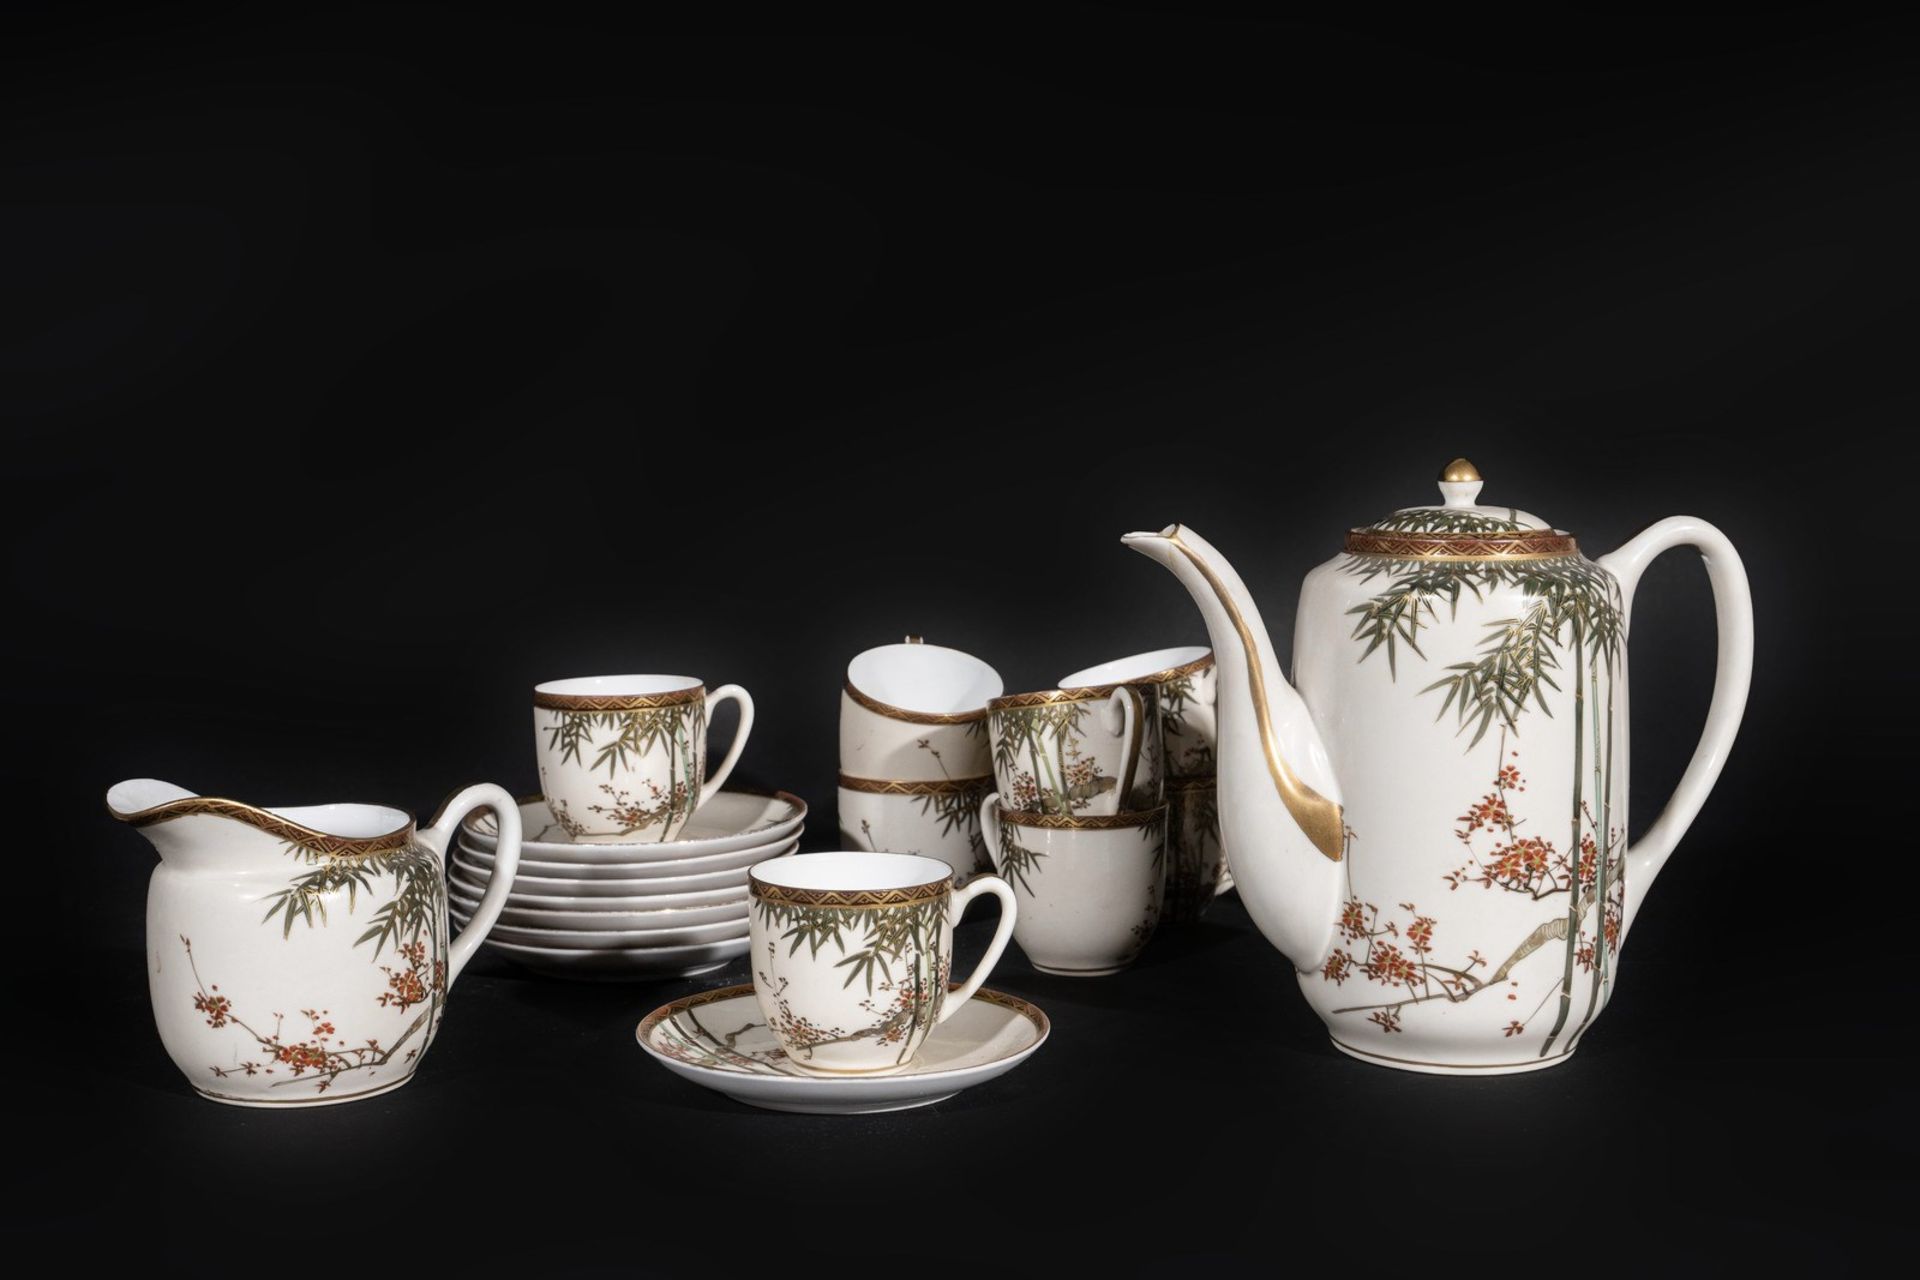 ARTE GIAPPONESE An eight cover white porcelain coffee serviceJapan, 19th century .